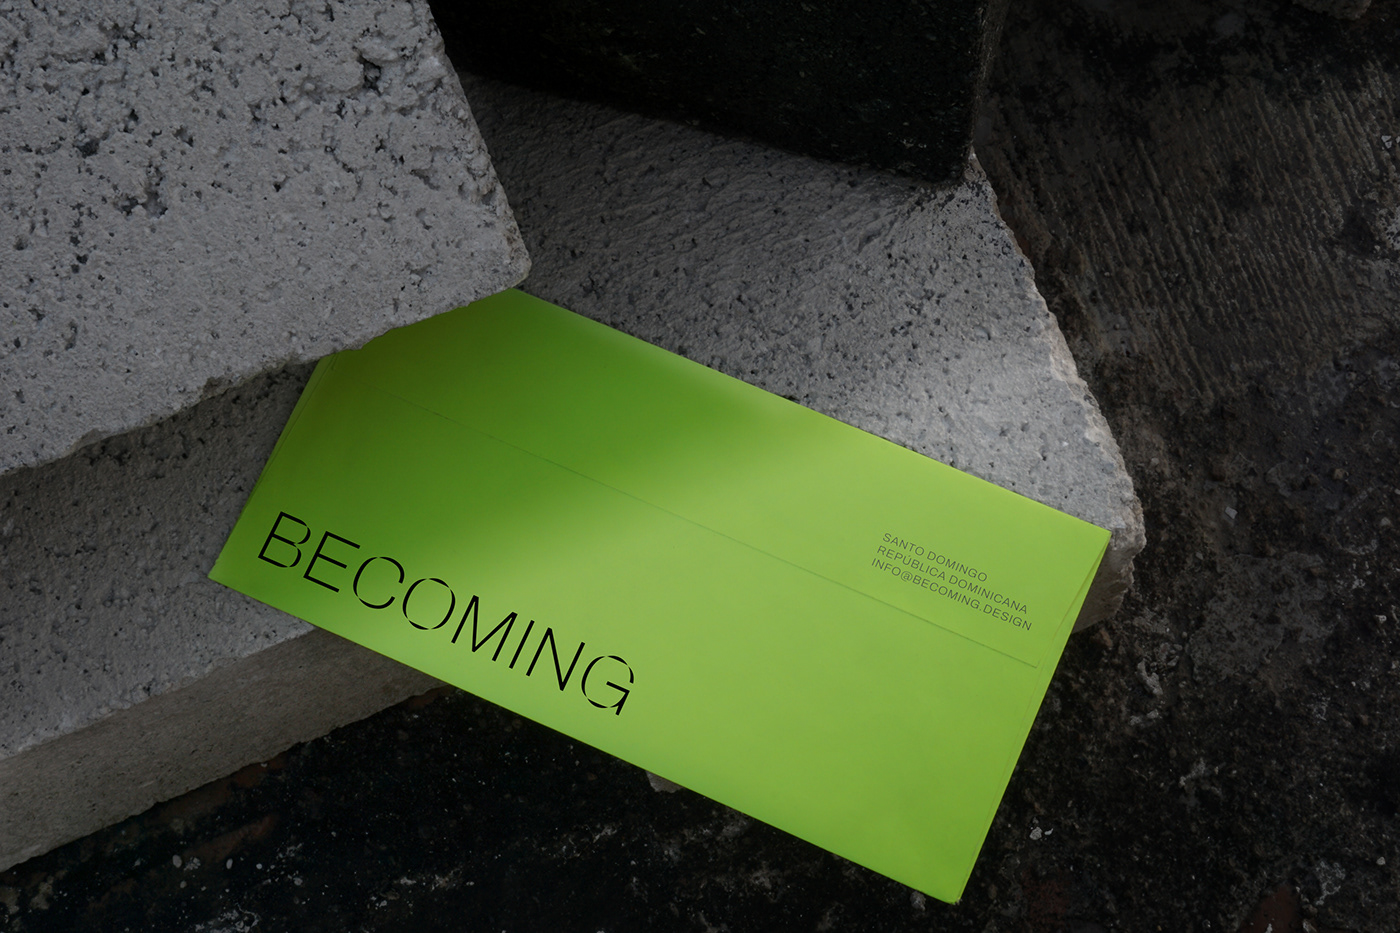 Green envelope design for Becoming, an architecture studio in Dominican Republic